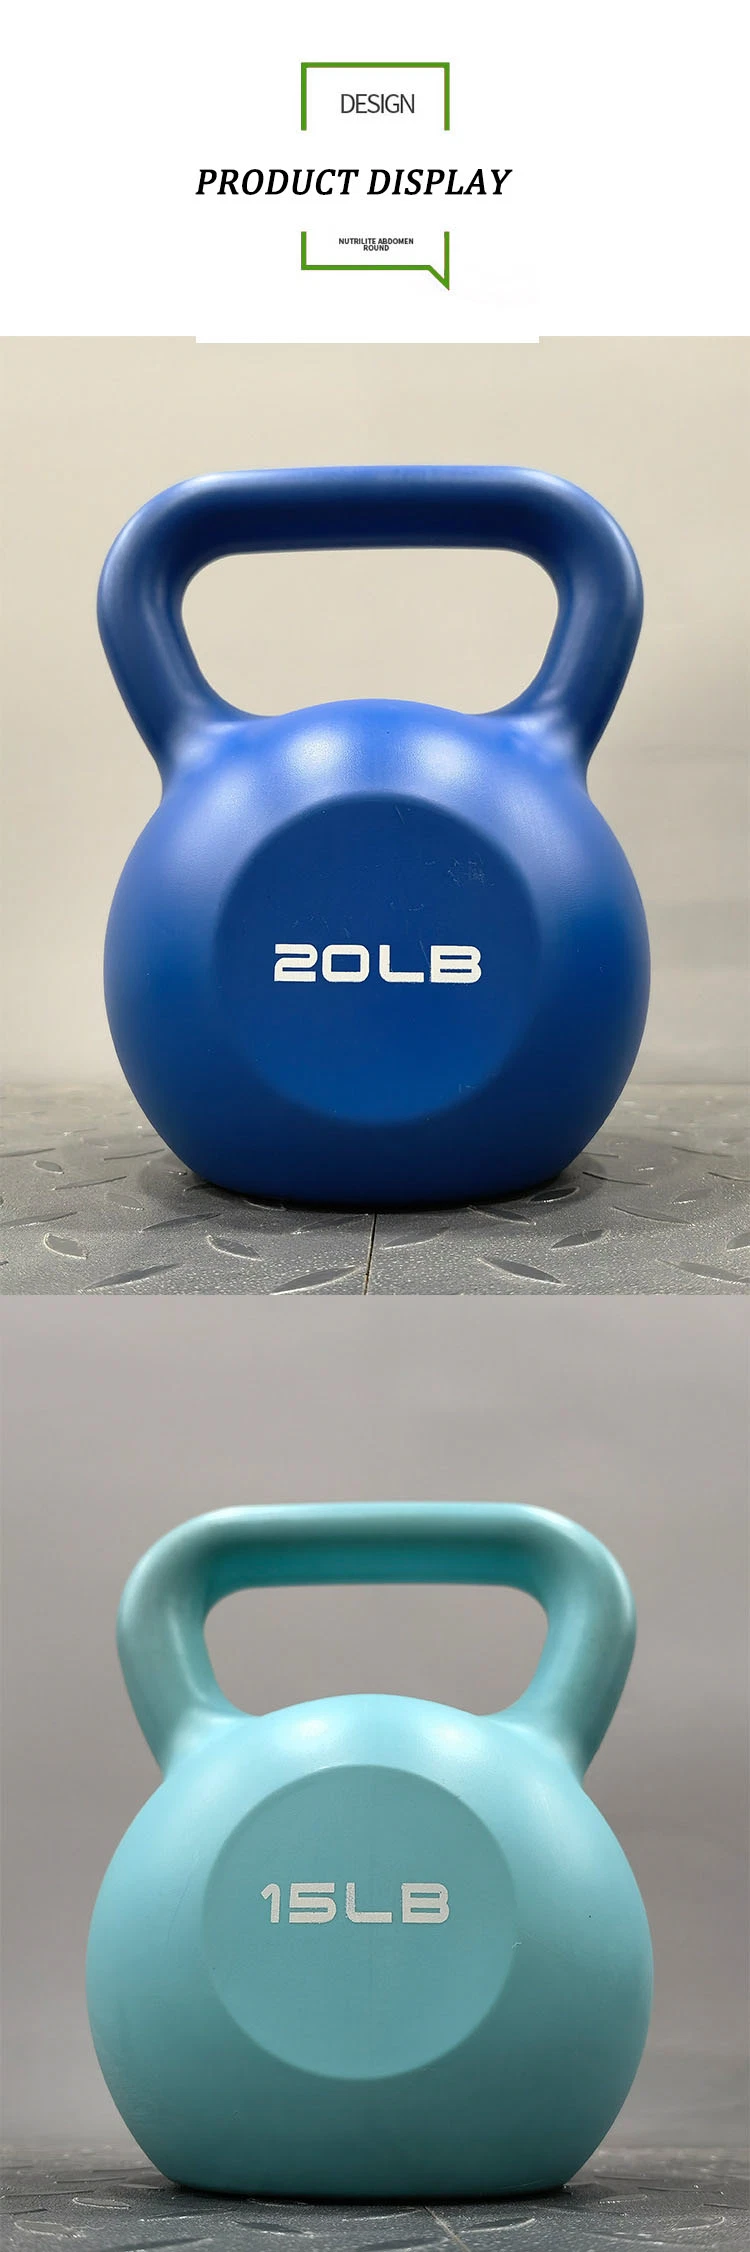 China High Quality Bodybuilding Kettlebell Handle Rubber Coated Weightlifting Cement Kettlebell